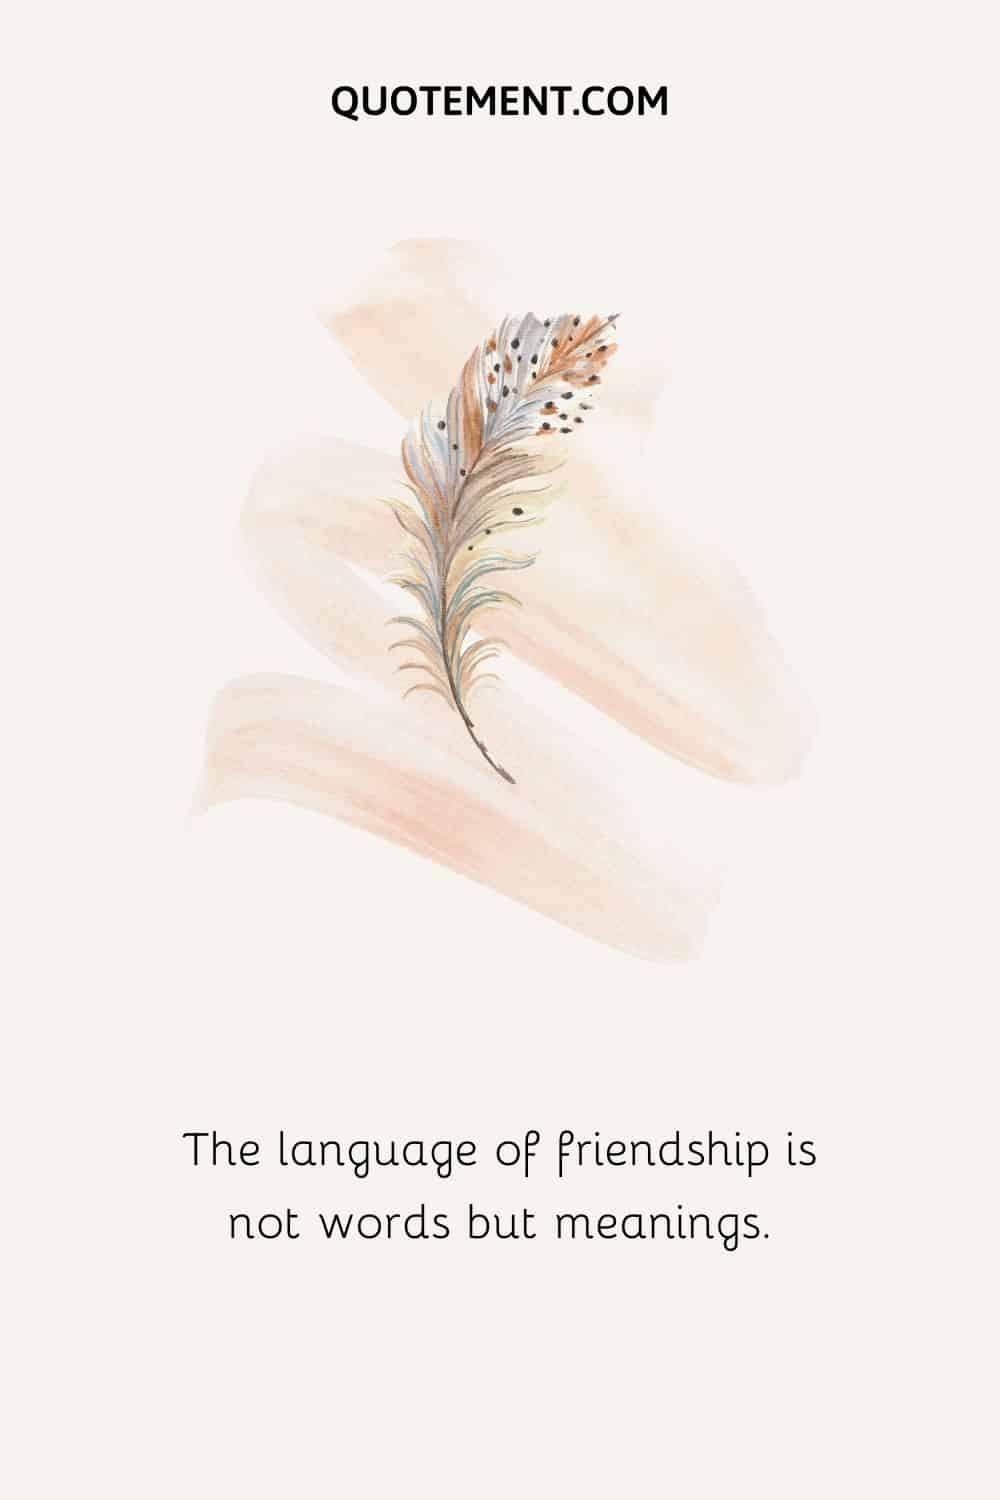 The language of friendship is not words but meanings.